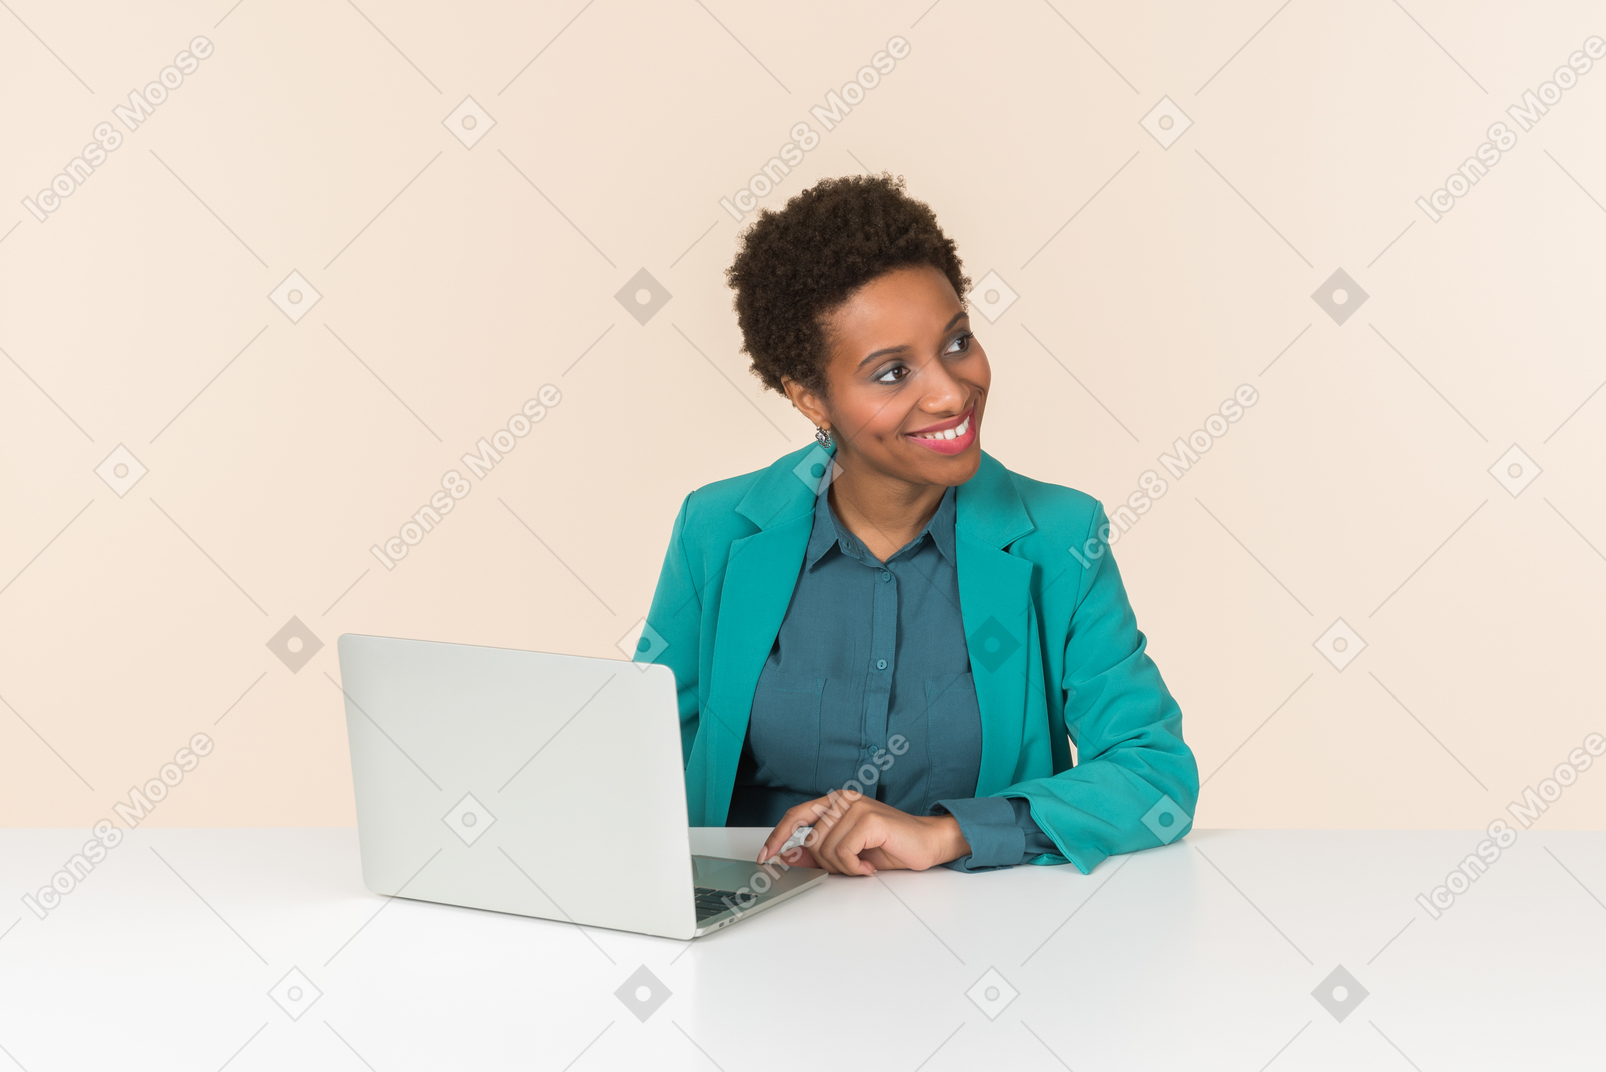 Young female office employee working on laptop and looking aside